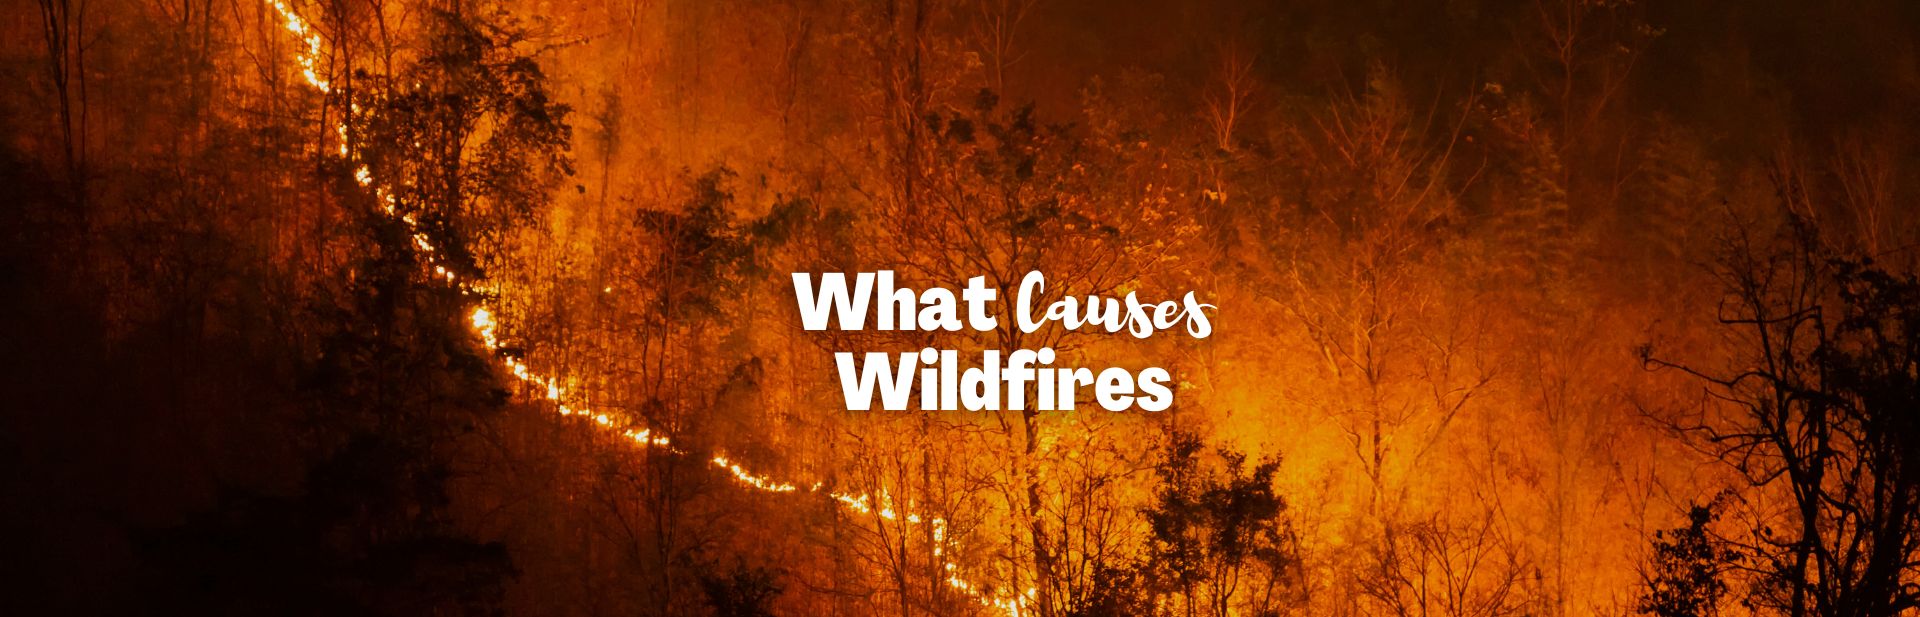 Man vs Nature: Understanding What Causes Wildfires